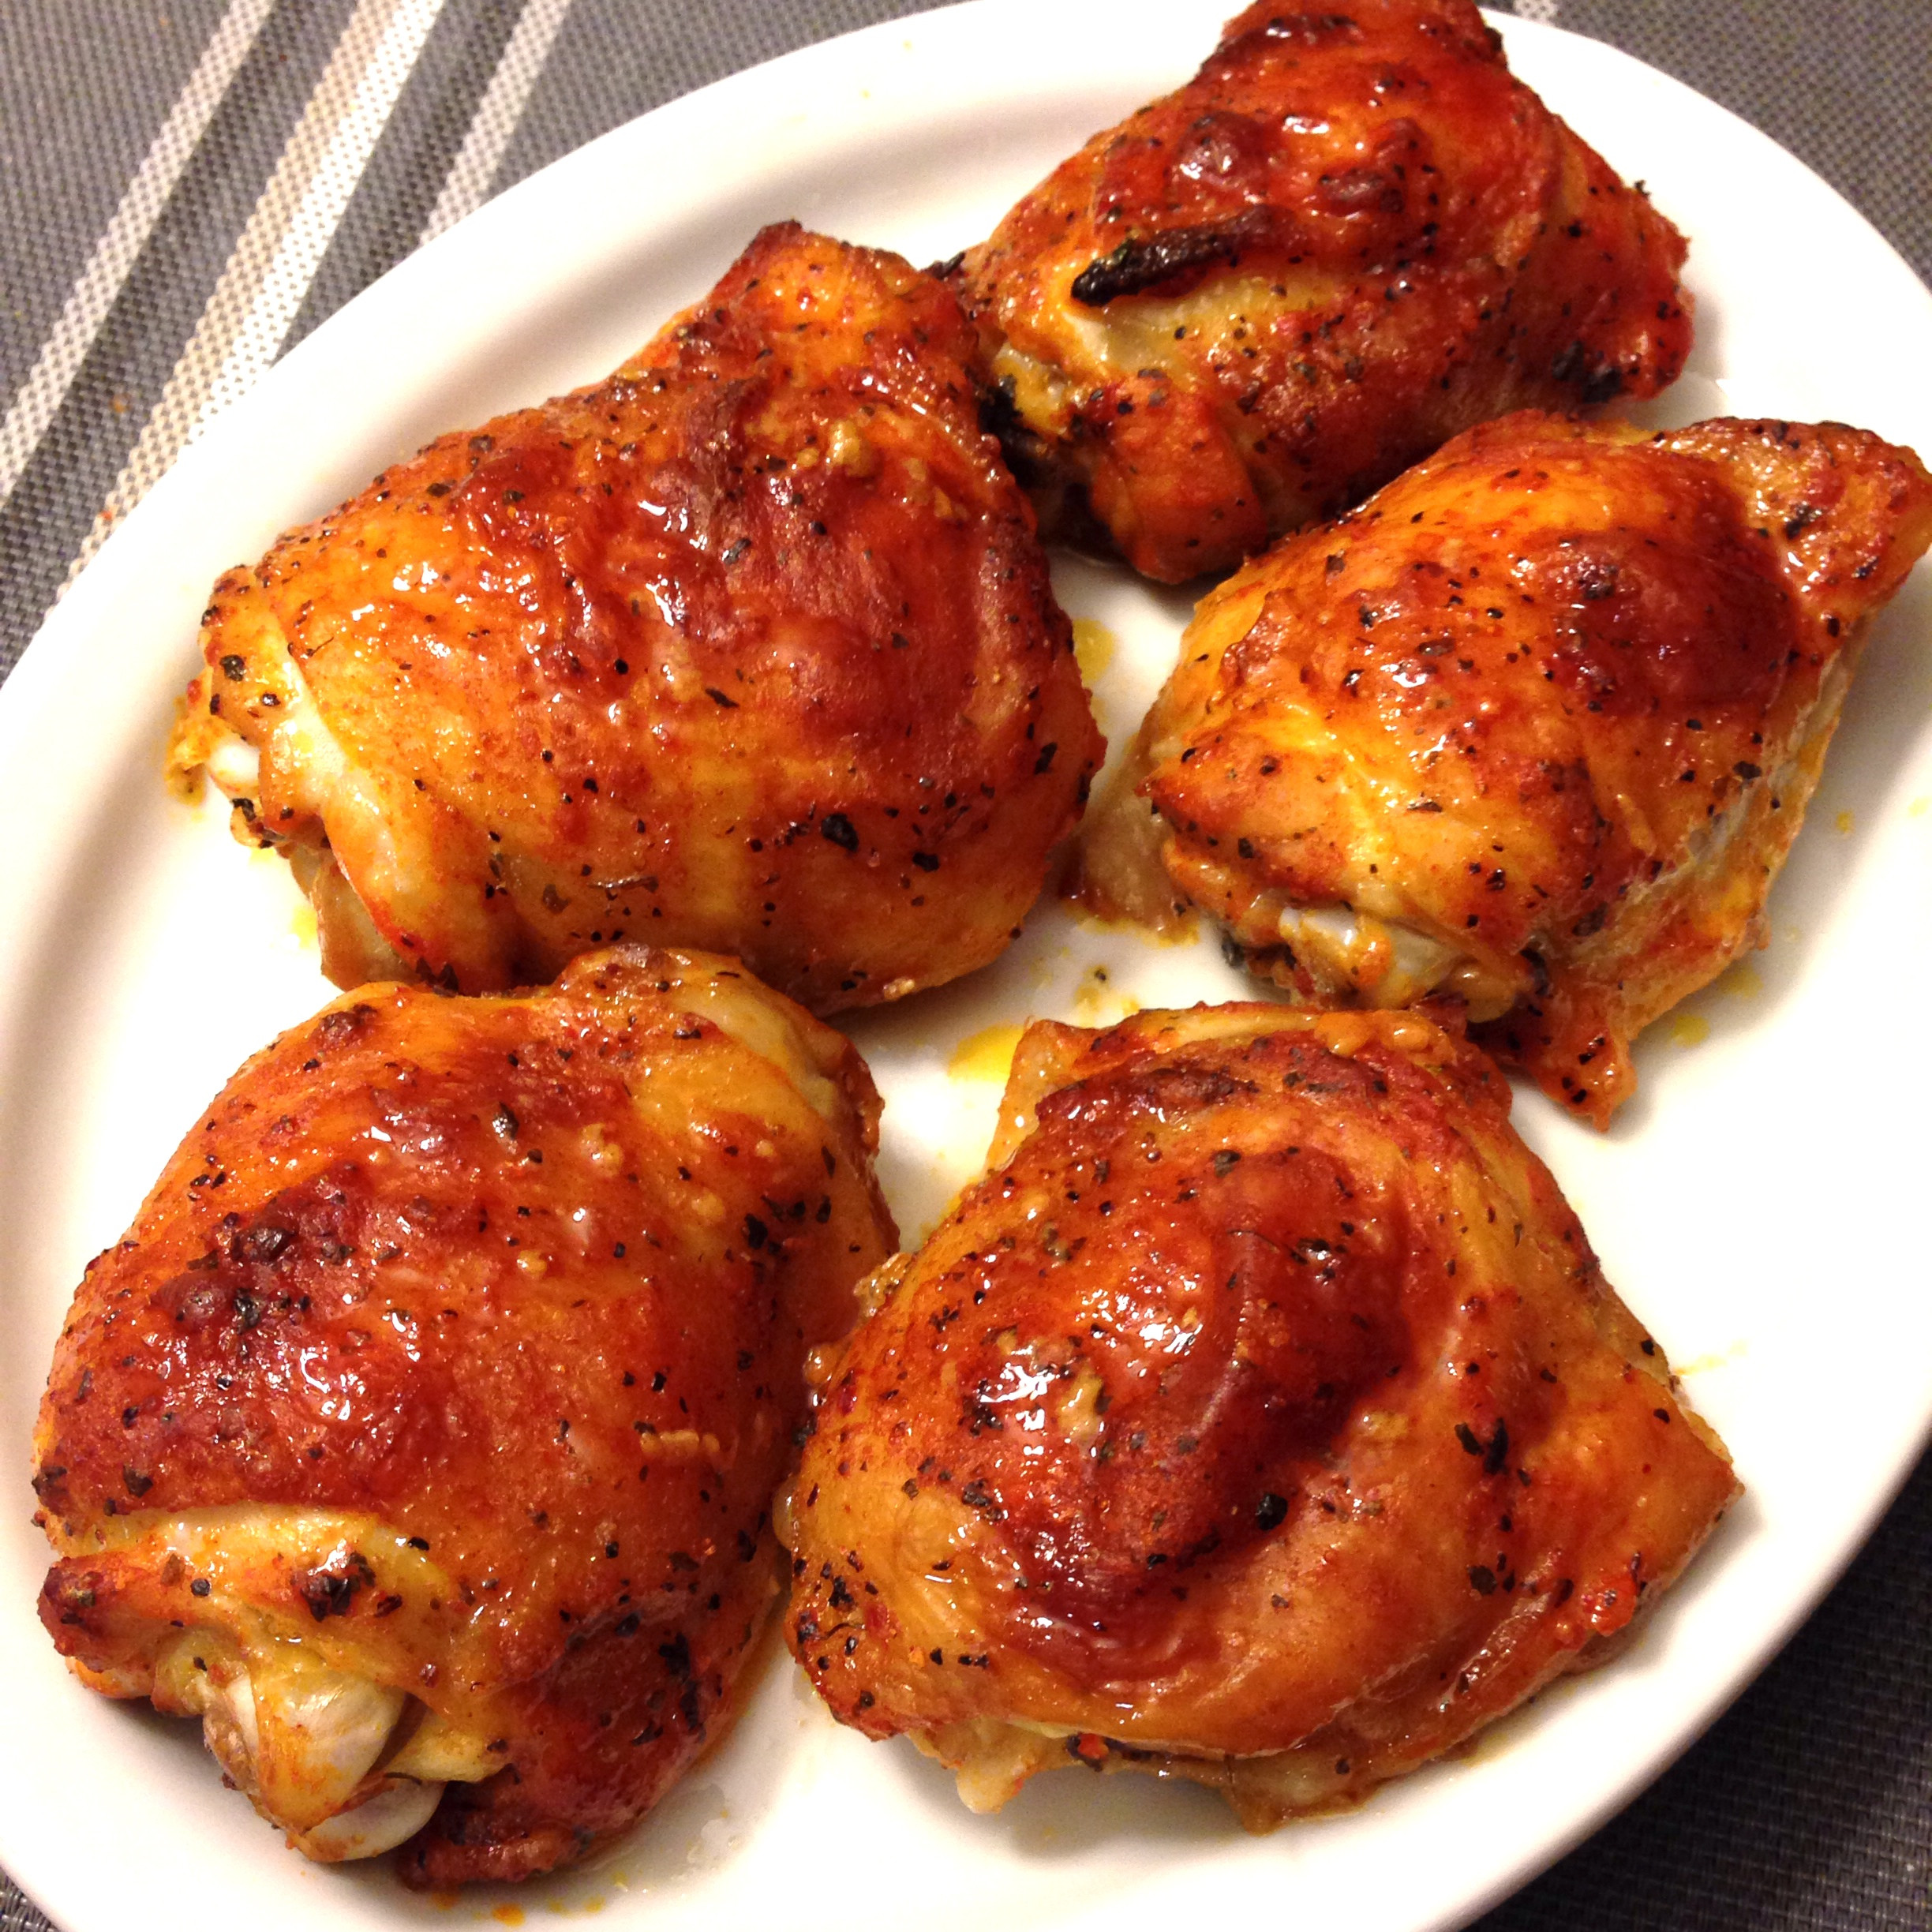 Healthy Way To Cook Chicken Thighs
 Chili Lime Baked Chicken Thighs — My Healthy Dish